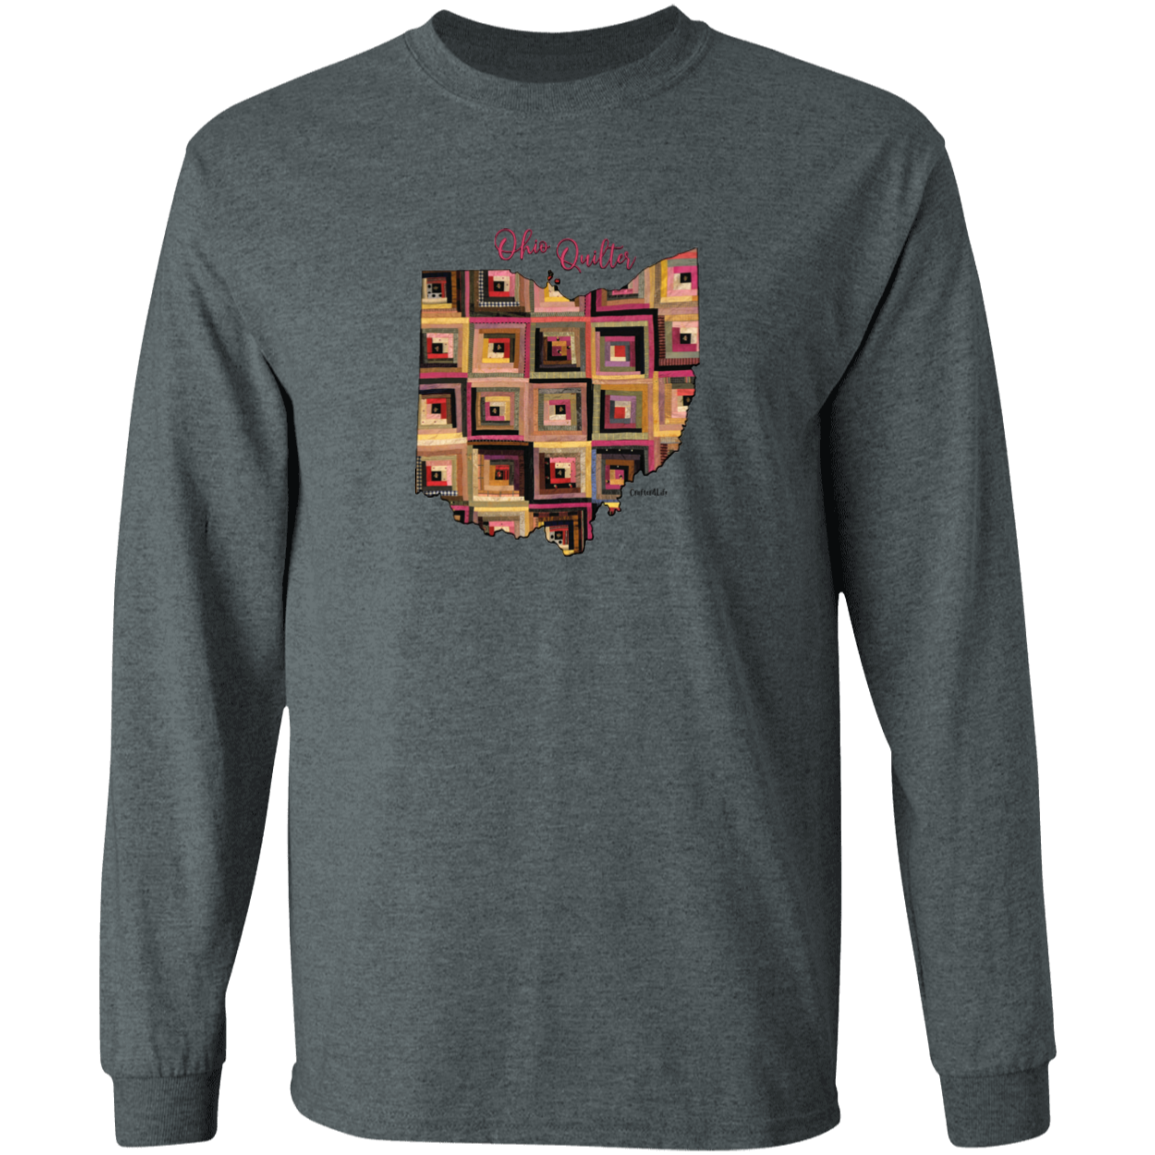 Ohio Quilter Long Sleeve T-Shirt, Gift for Quilting Friends and Family